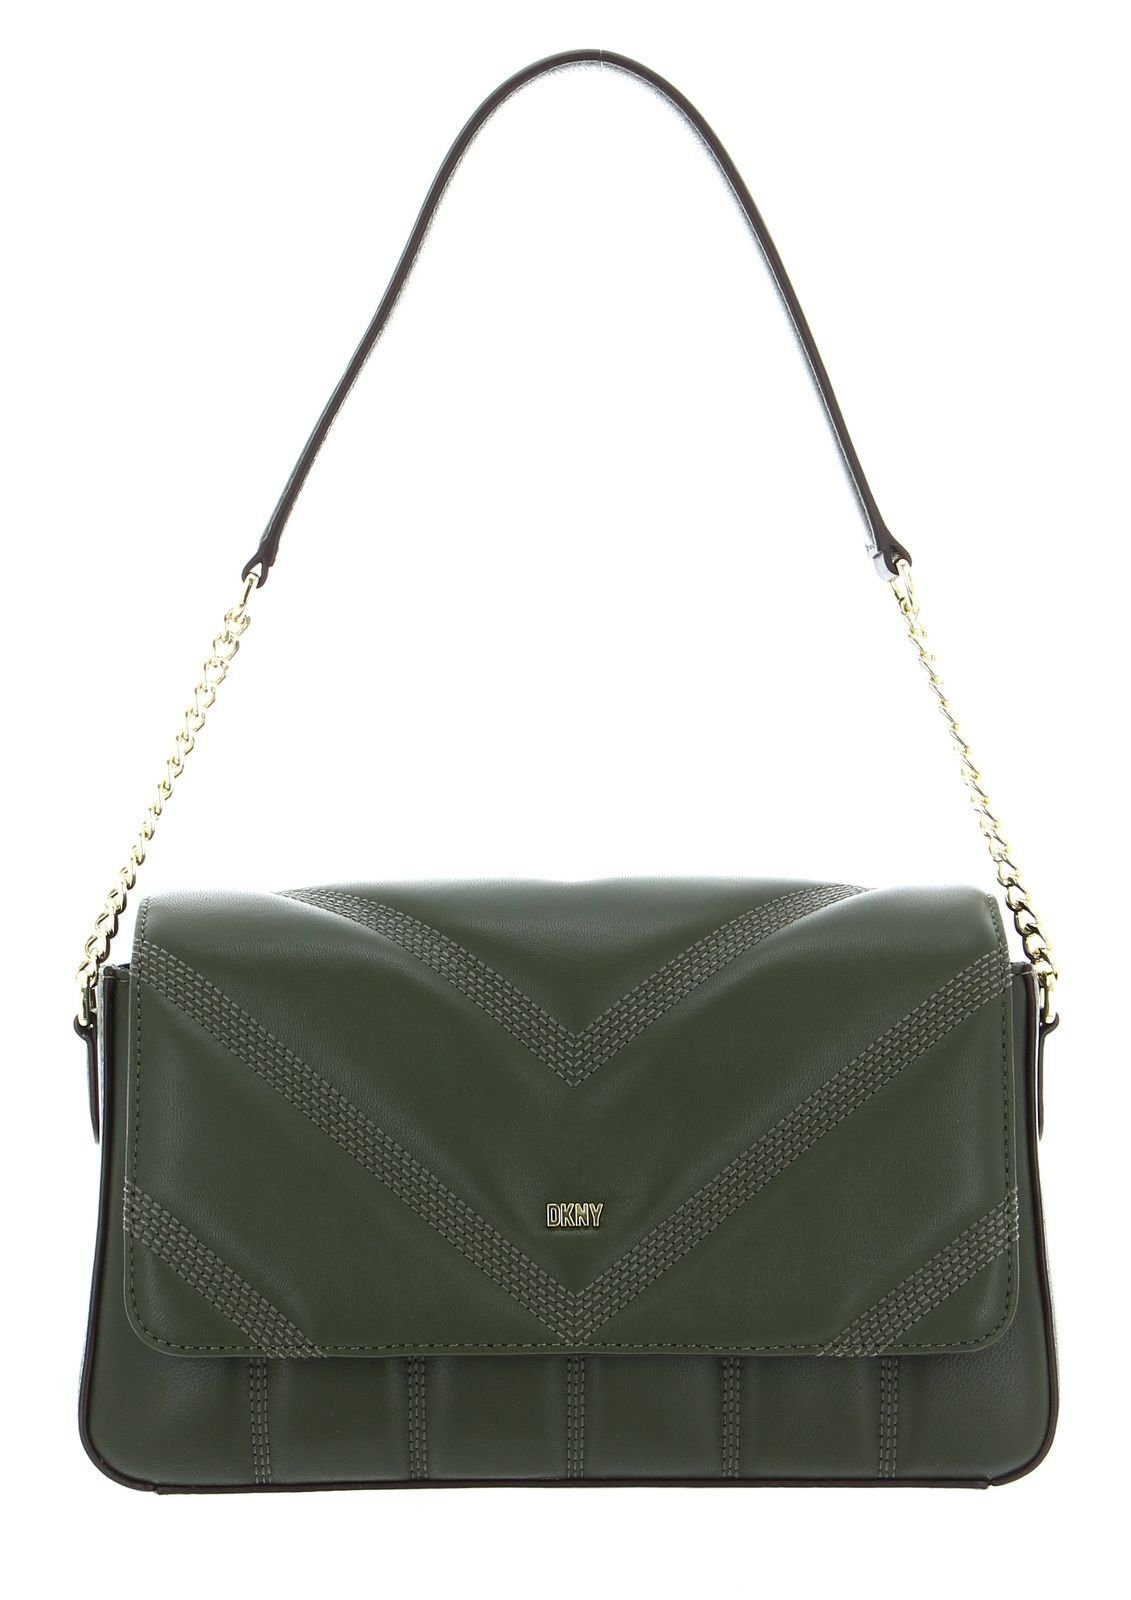 Green Army Schultertasche DKNY Becca